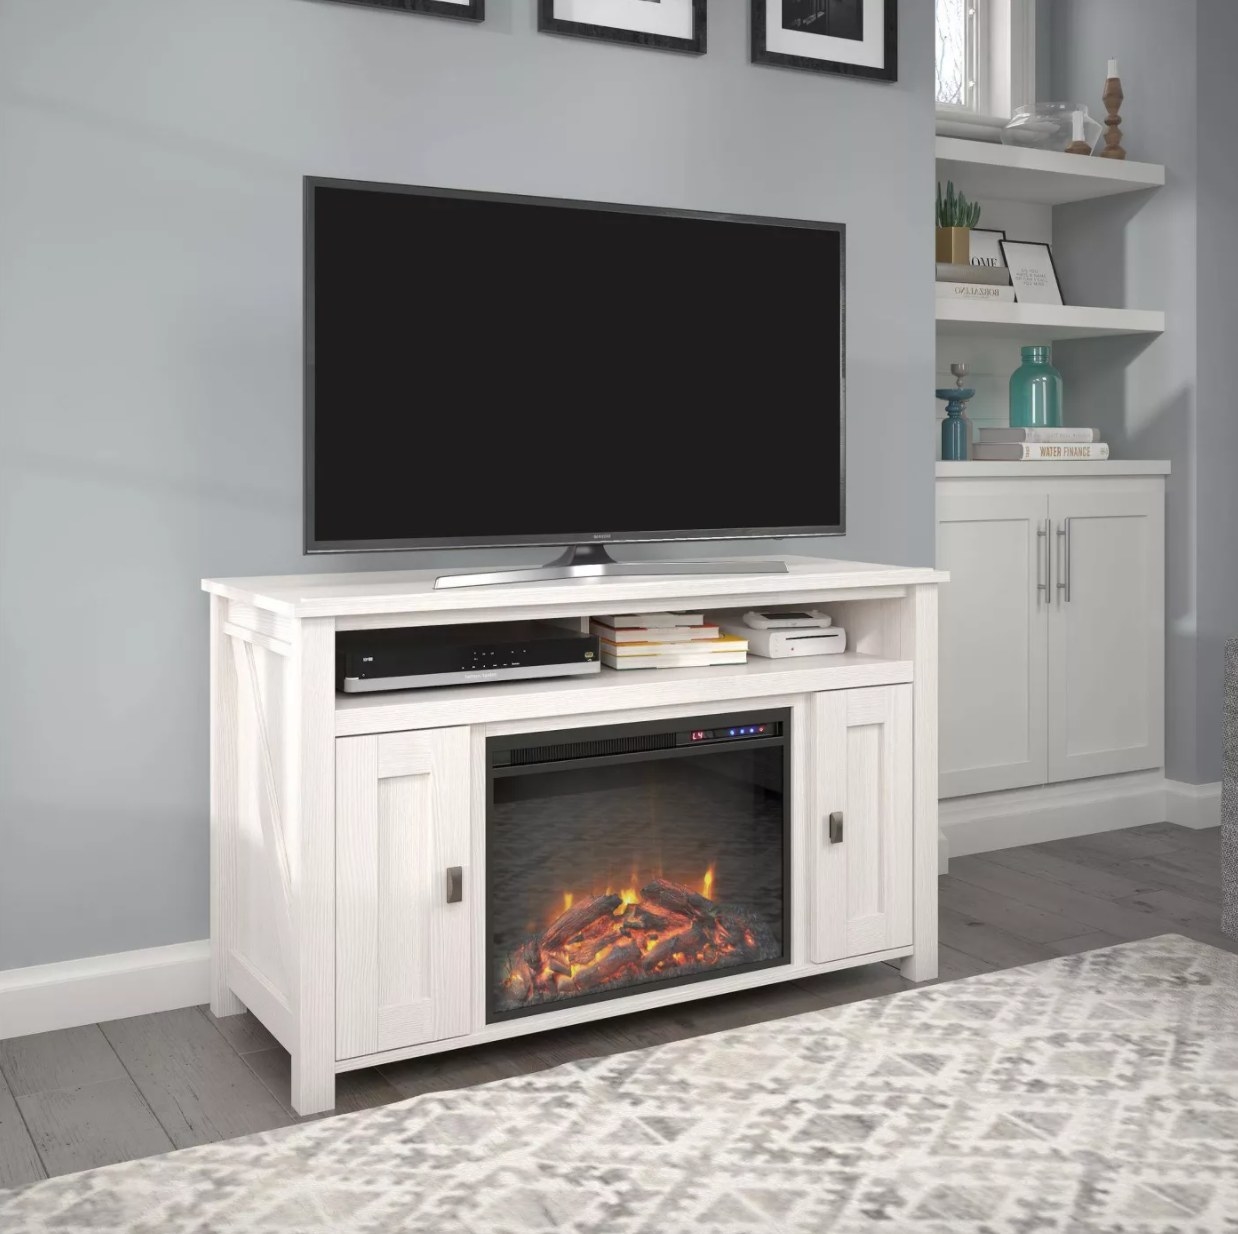 A white TV stand with electric fireplace and heater and storage cabinets